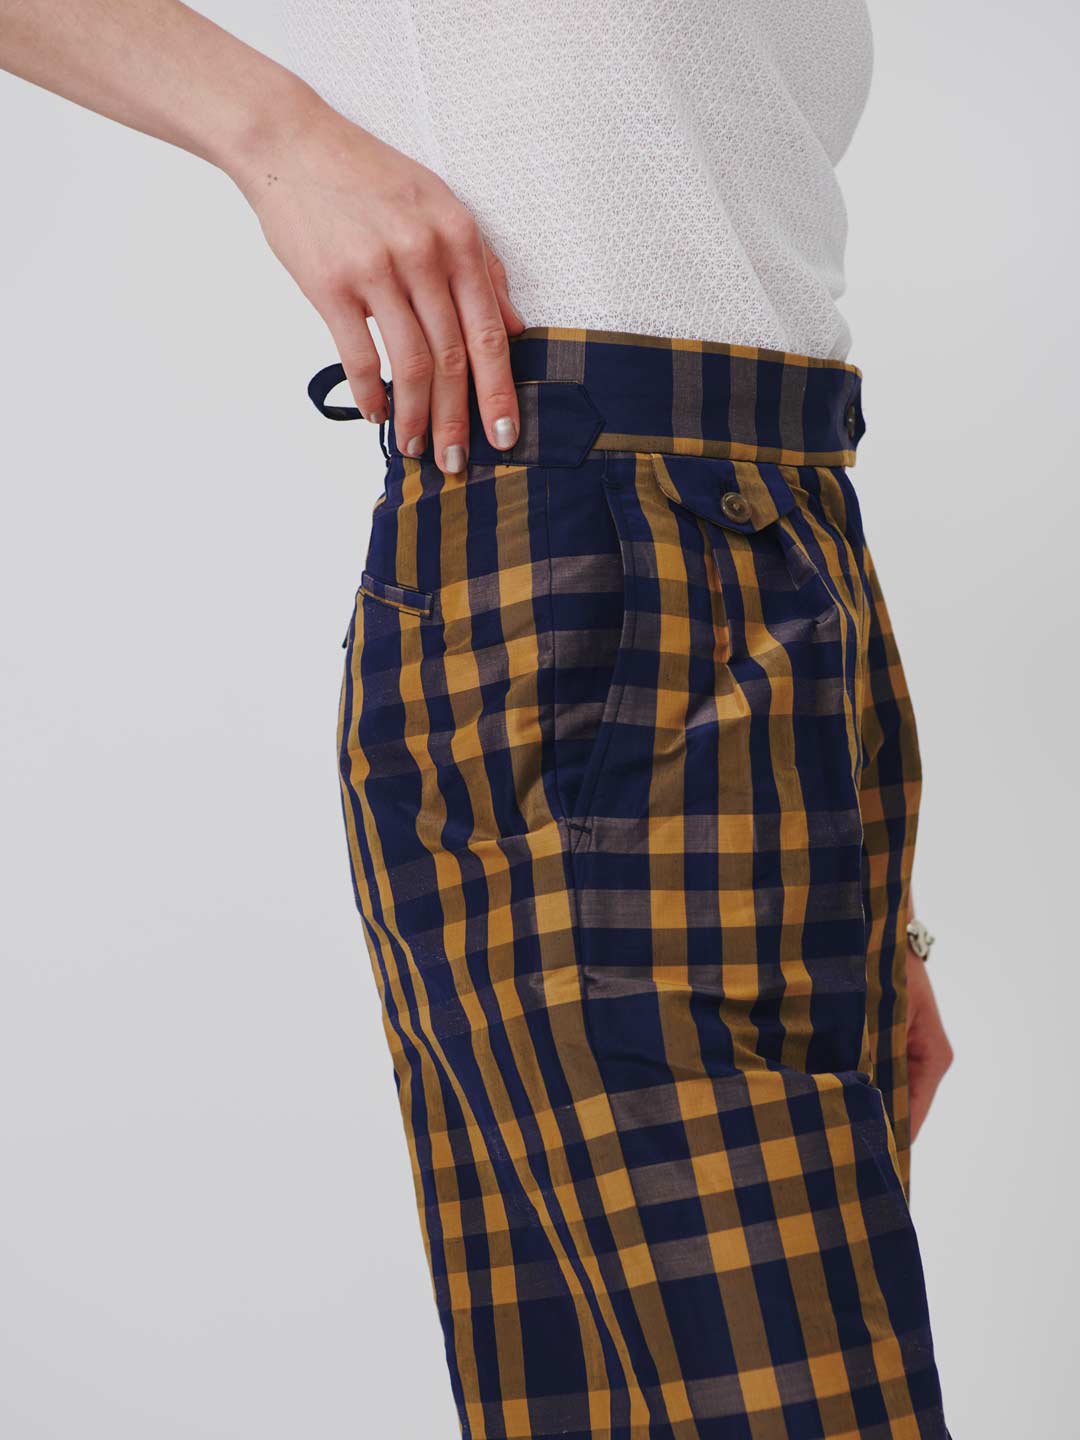 Knotted Back Pleated Trousers - Check